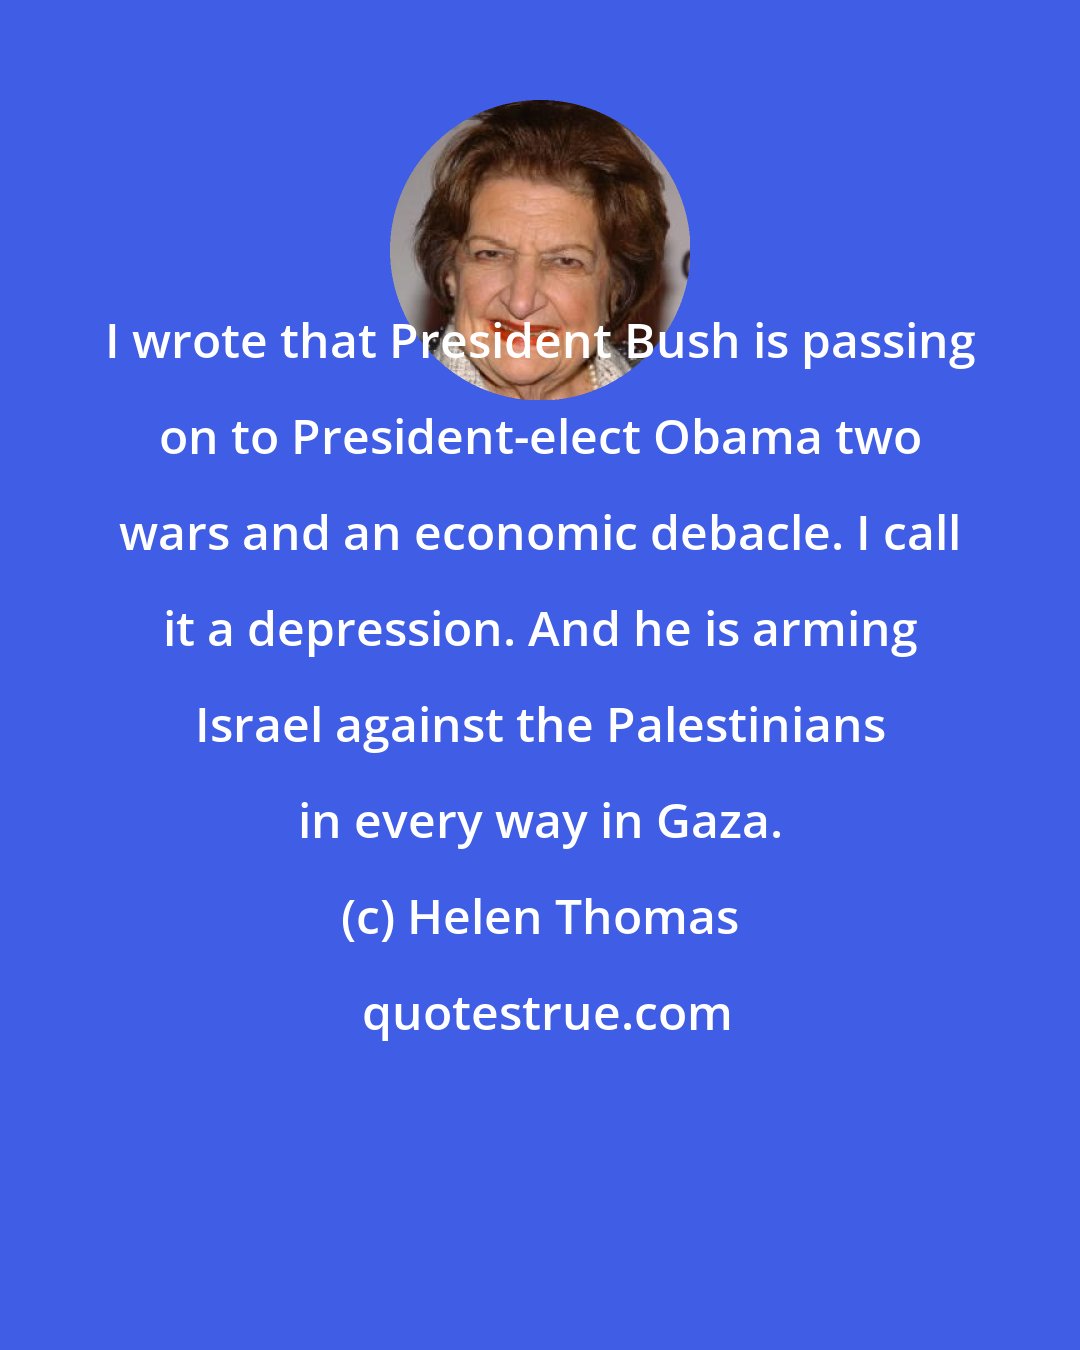 Helen Thomas: I wrote that President Bush is passing on to President-elect Obama two wars and an economic debacle. I call it a depression. And he is arming Israel against the Palestinians in every way in Gaza.